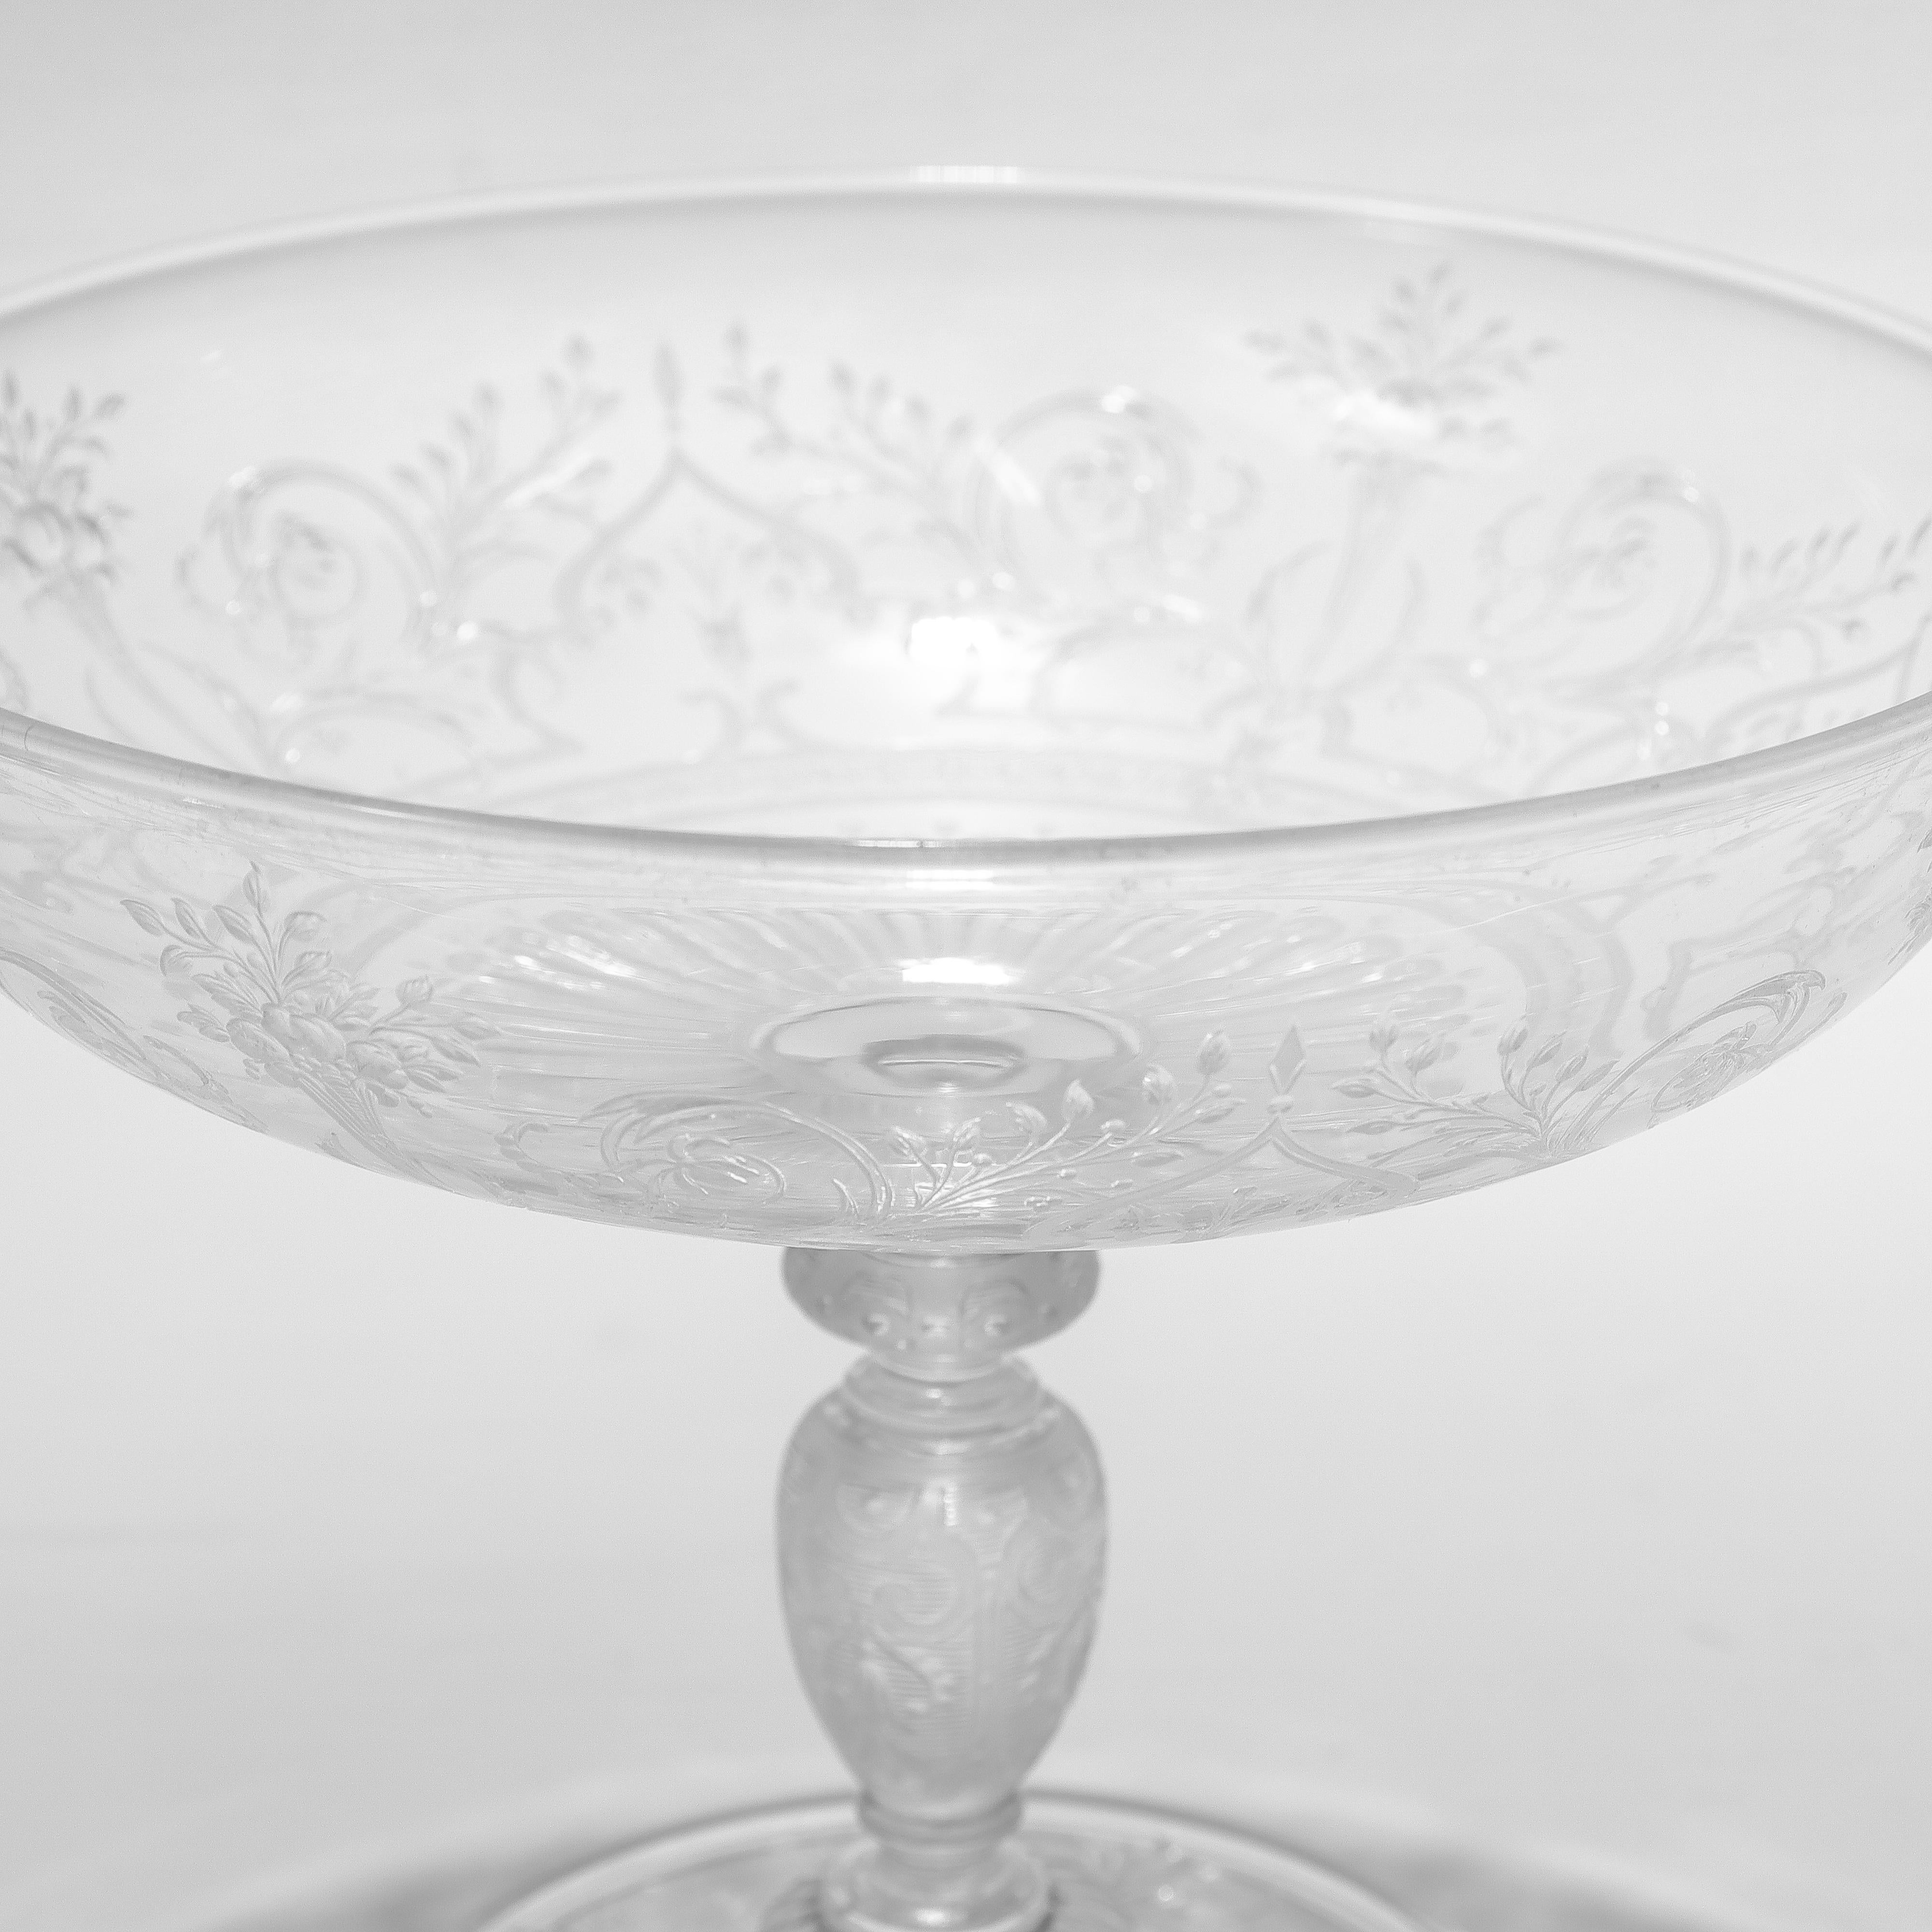 Antique Stourbridge Etched & Engraved Glass Lidded Compote or Tazza For Sale 6